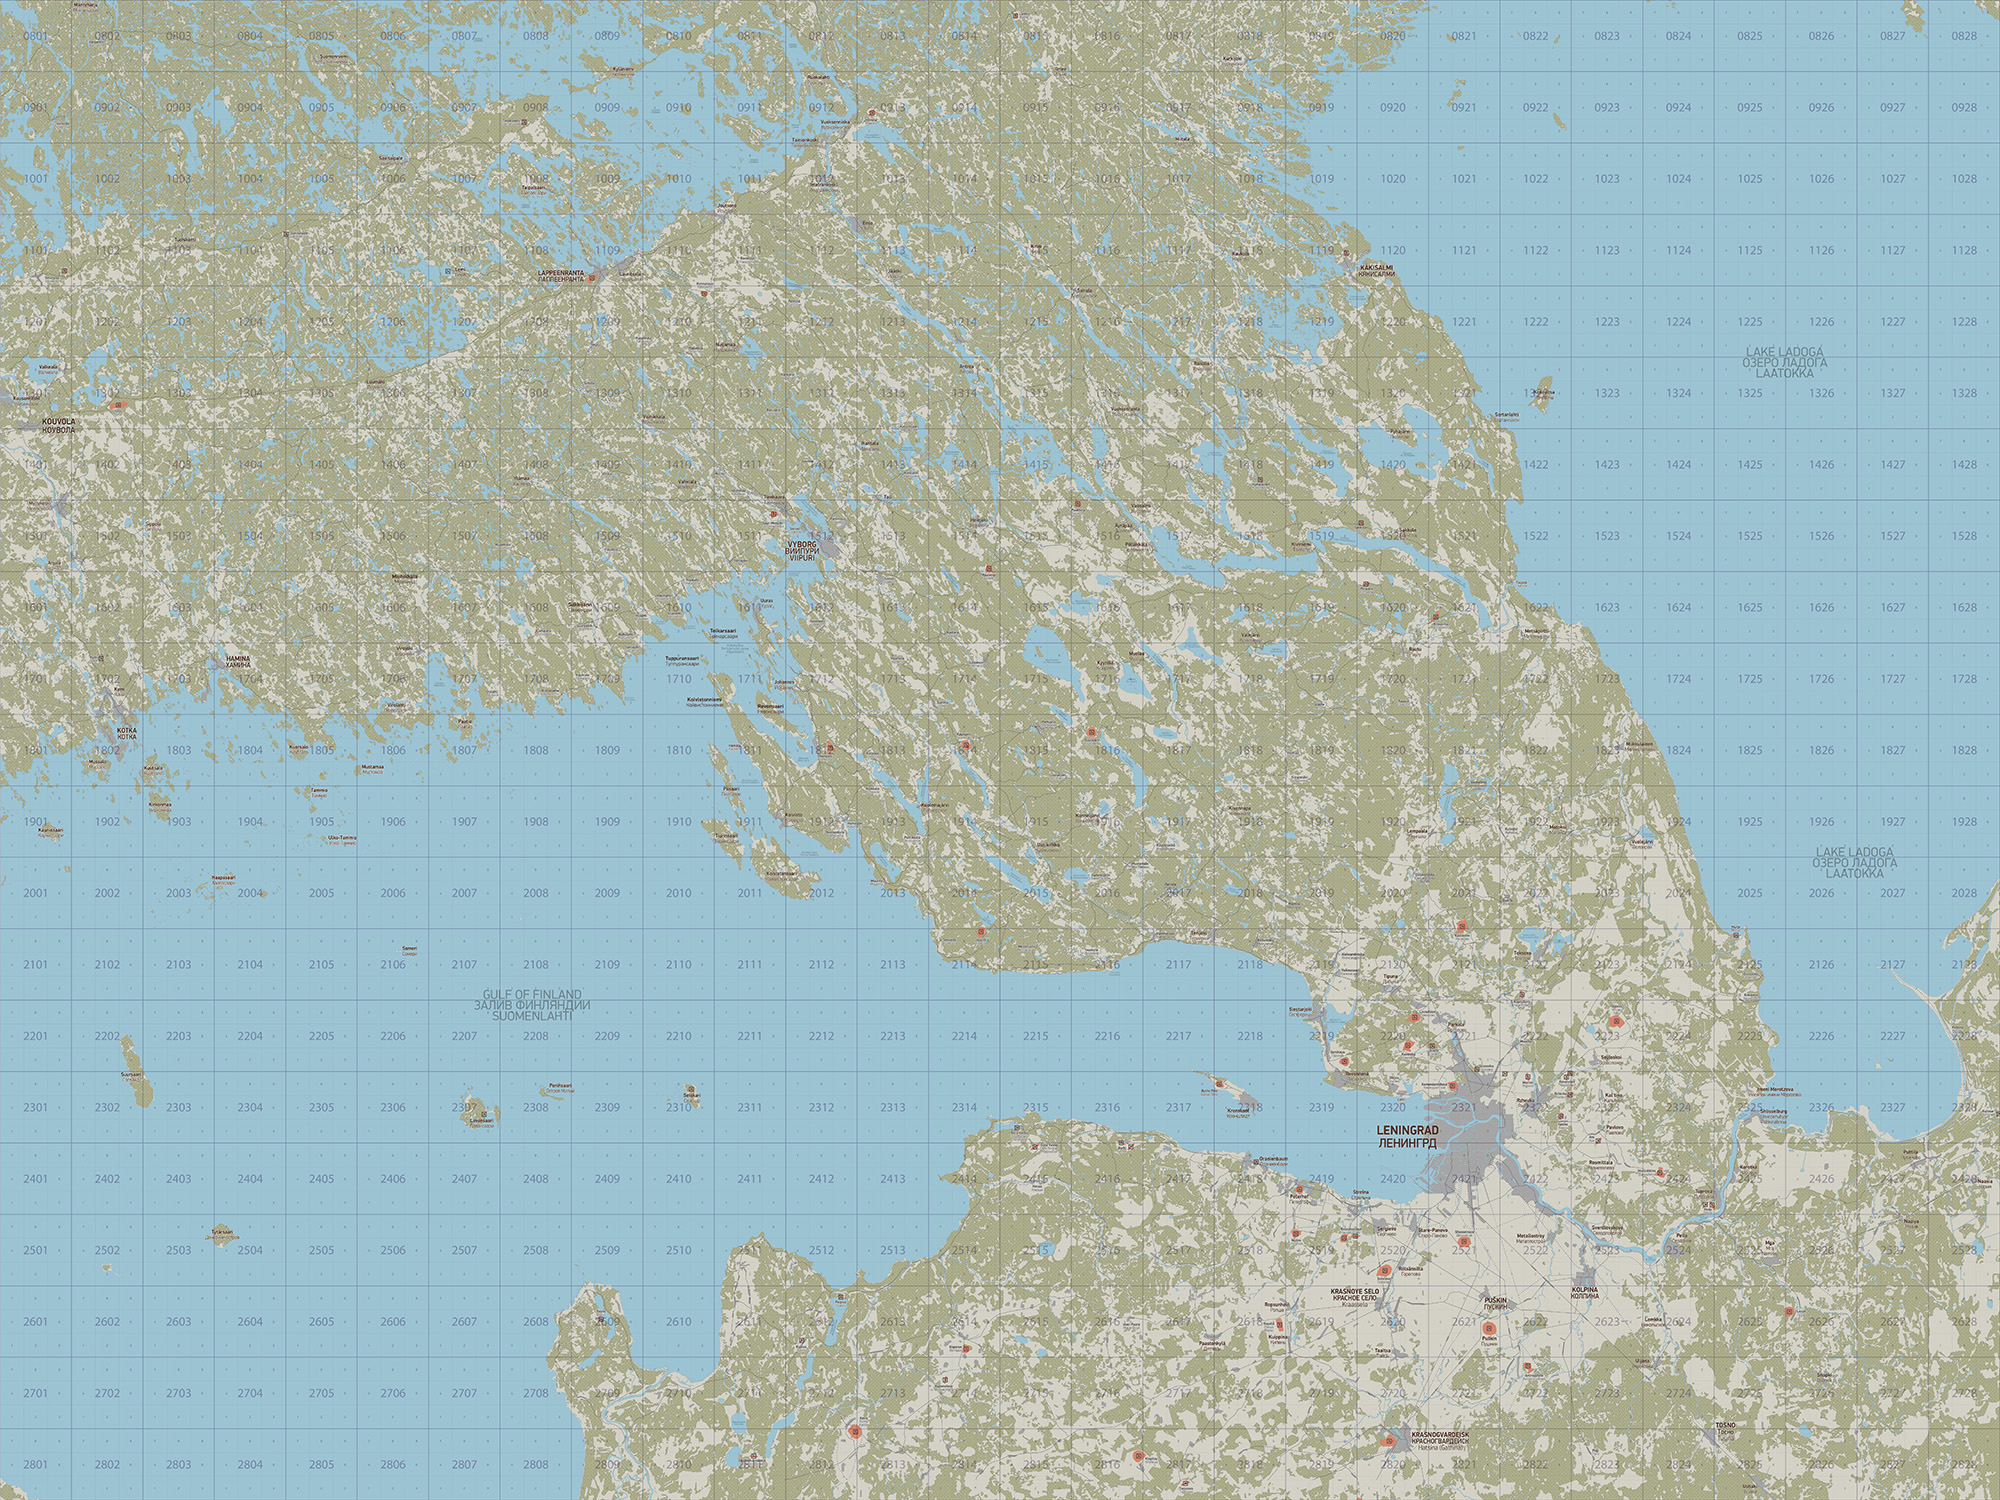 The flying area of the Karelian Sithmus map is 280km x 210km.